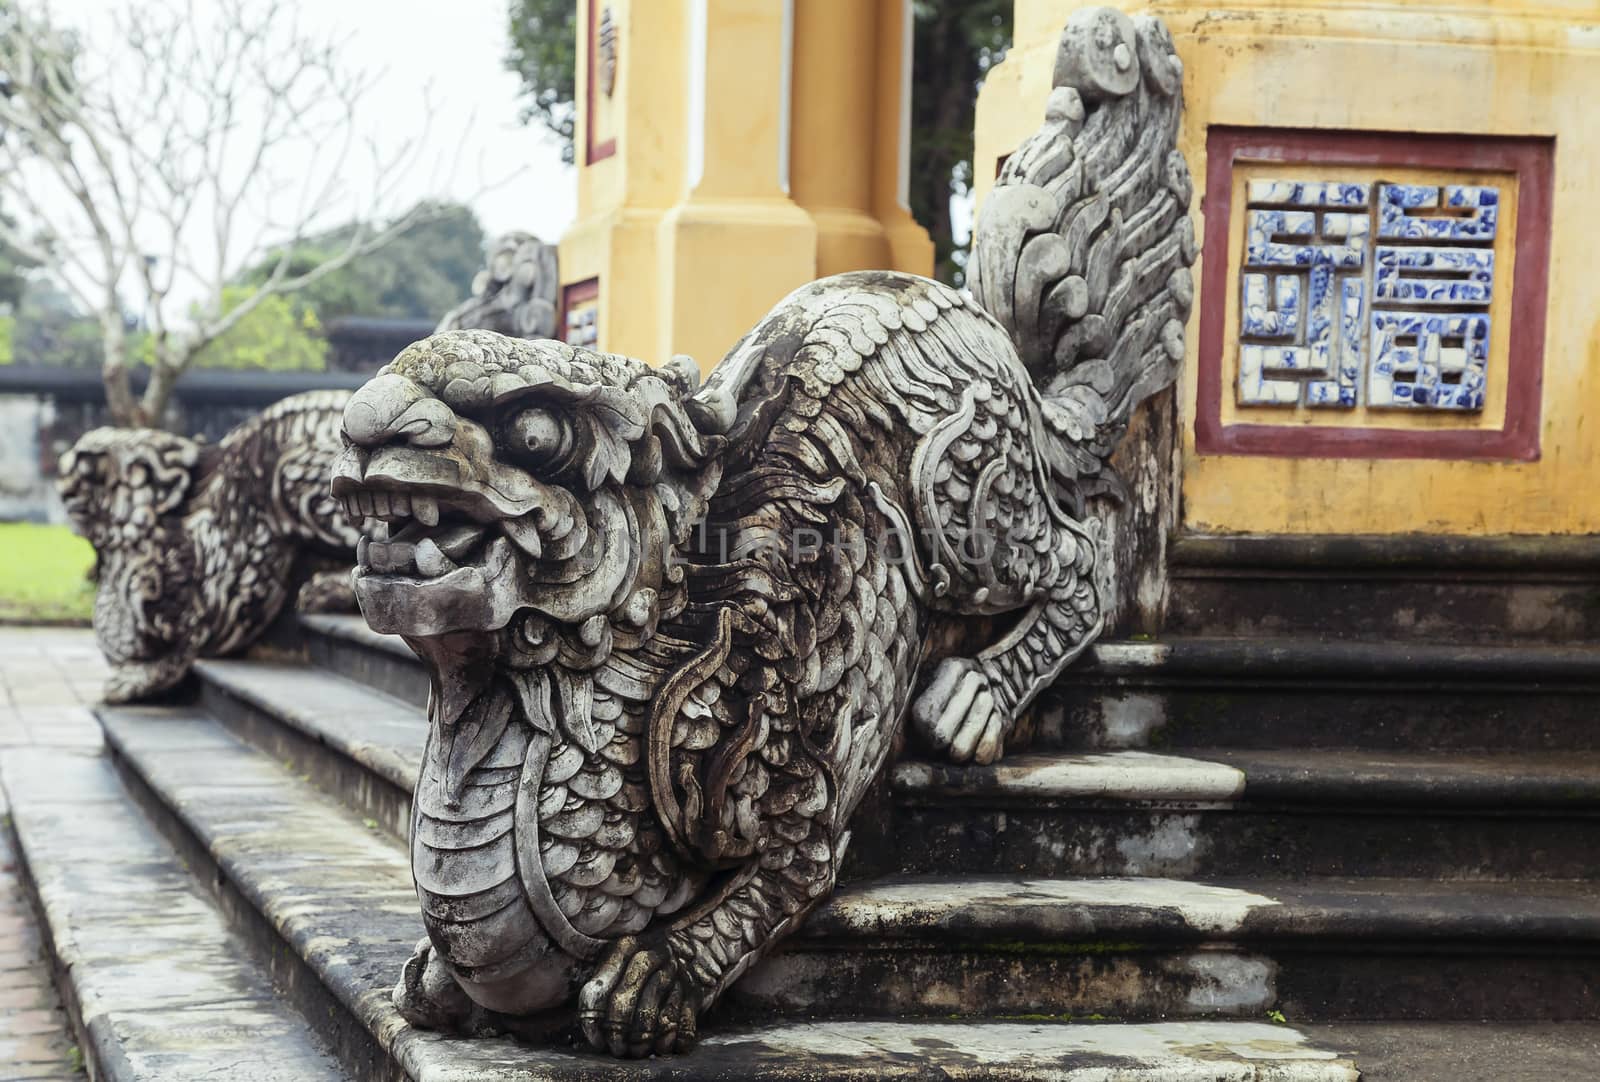 Dragon-shaped handrail in Hue Imperial Palace, Vietnam. The symbol of good fortune on the wall